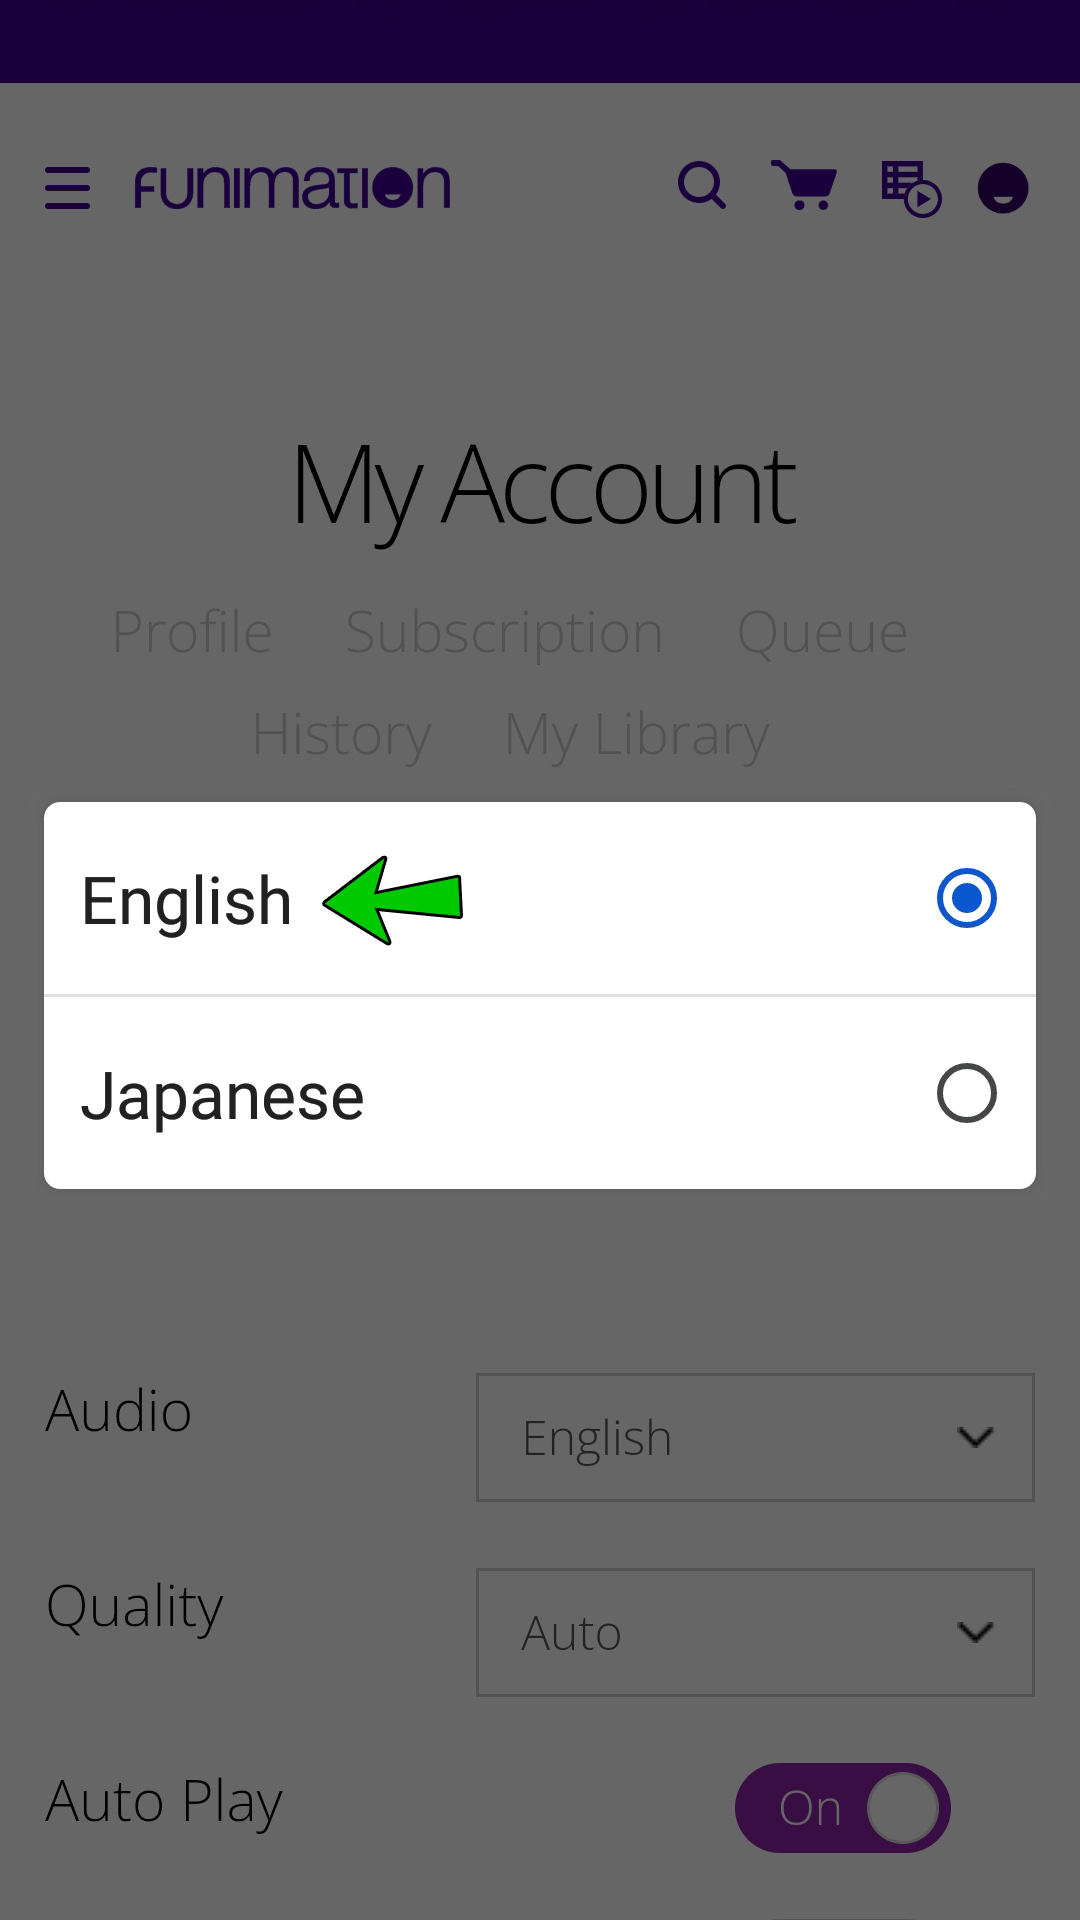 How to download videos to watch while my iOS device is offline – Funimation